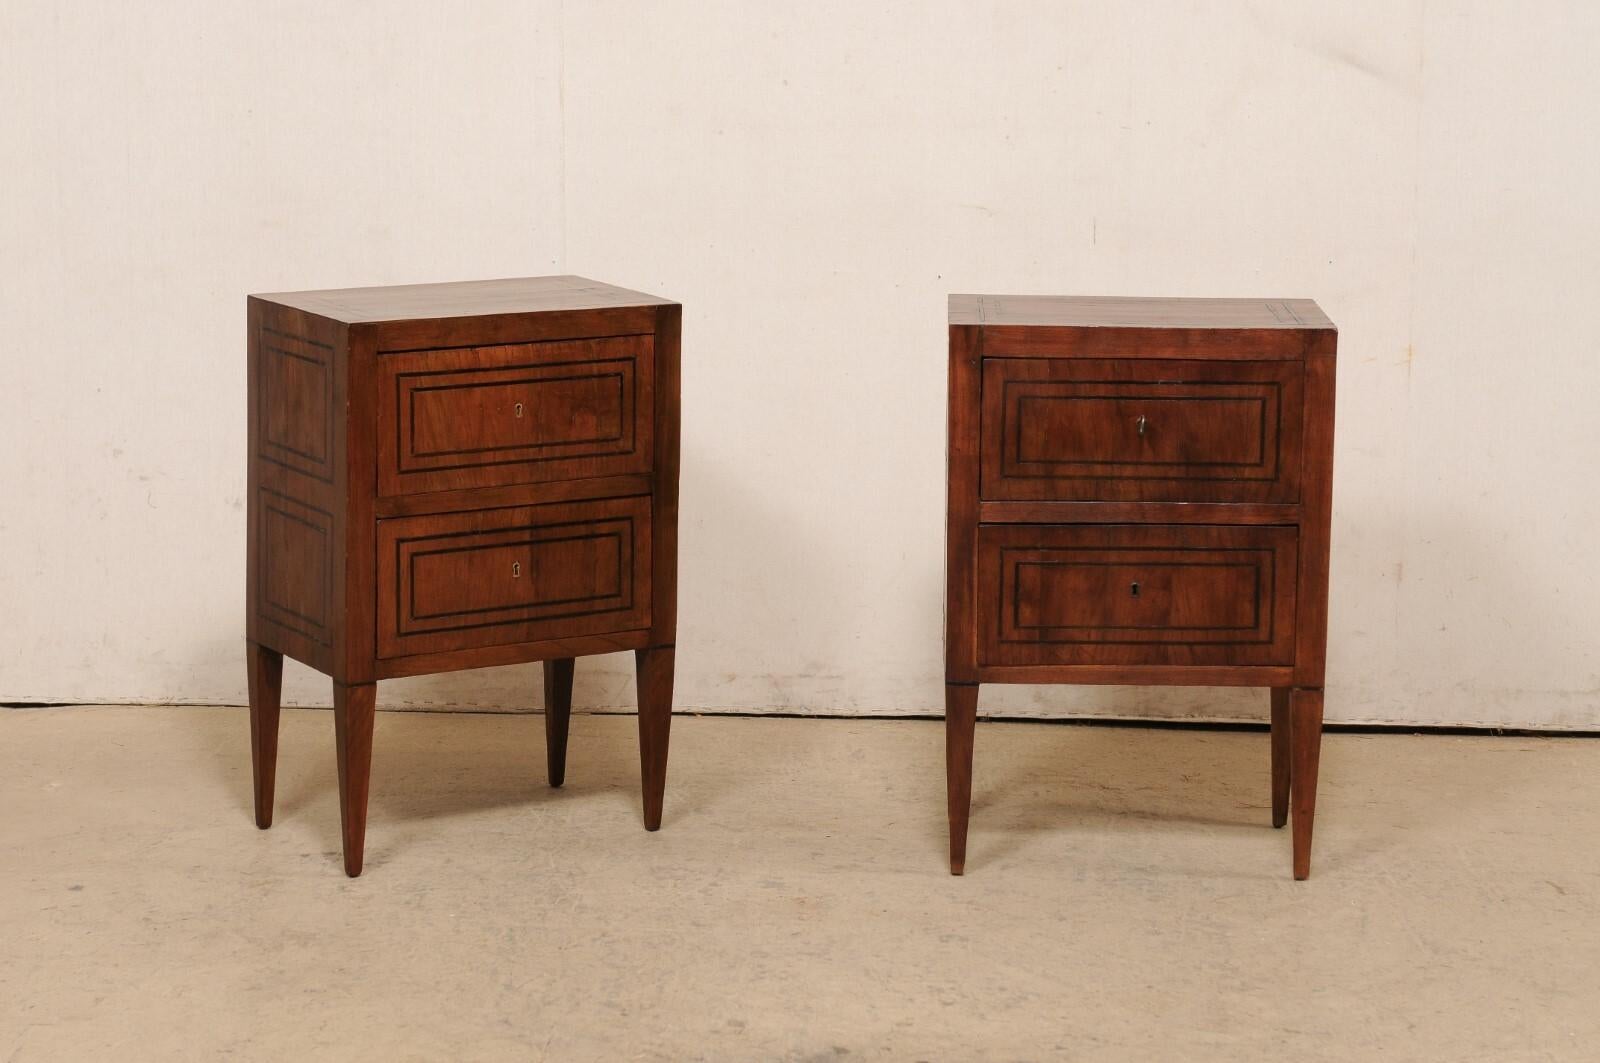 An Italian pair of two-drawer raised side chests with inlay banding, from the early 19th century. These antique smaller-sized chests from Italy have been designed in nice, clean/linear lines, allowing the beautifully veneered wood grain and inlay